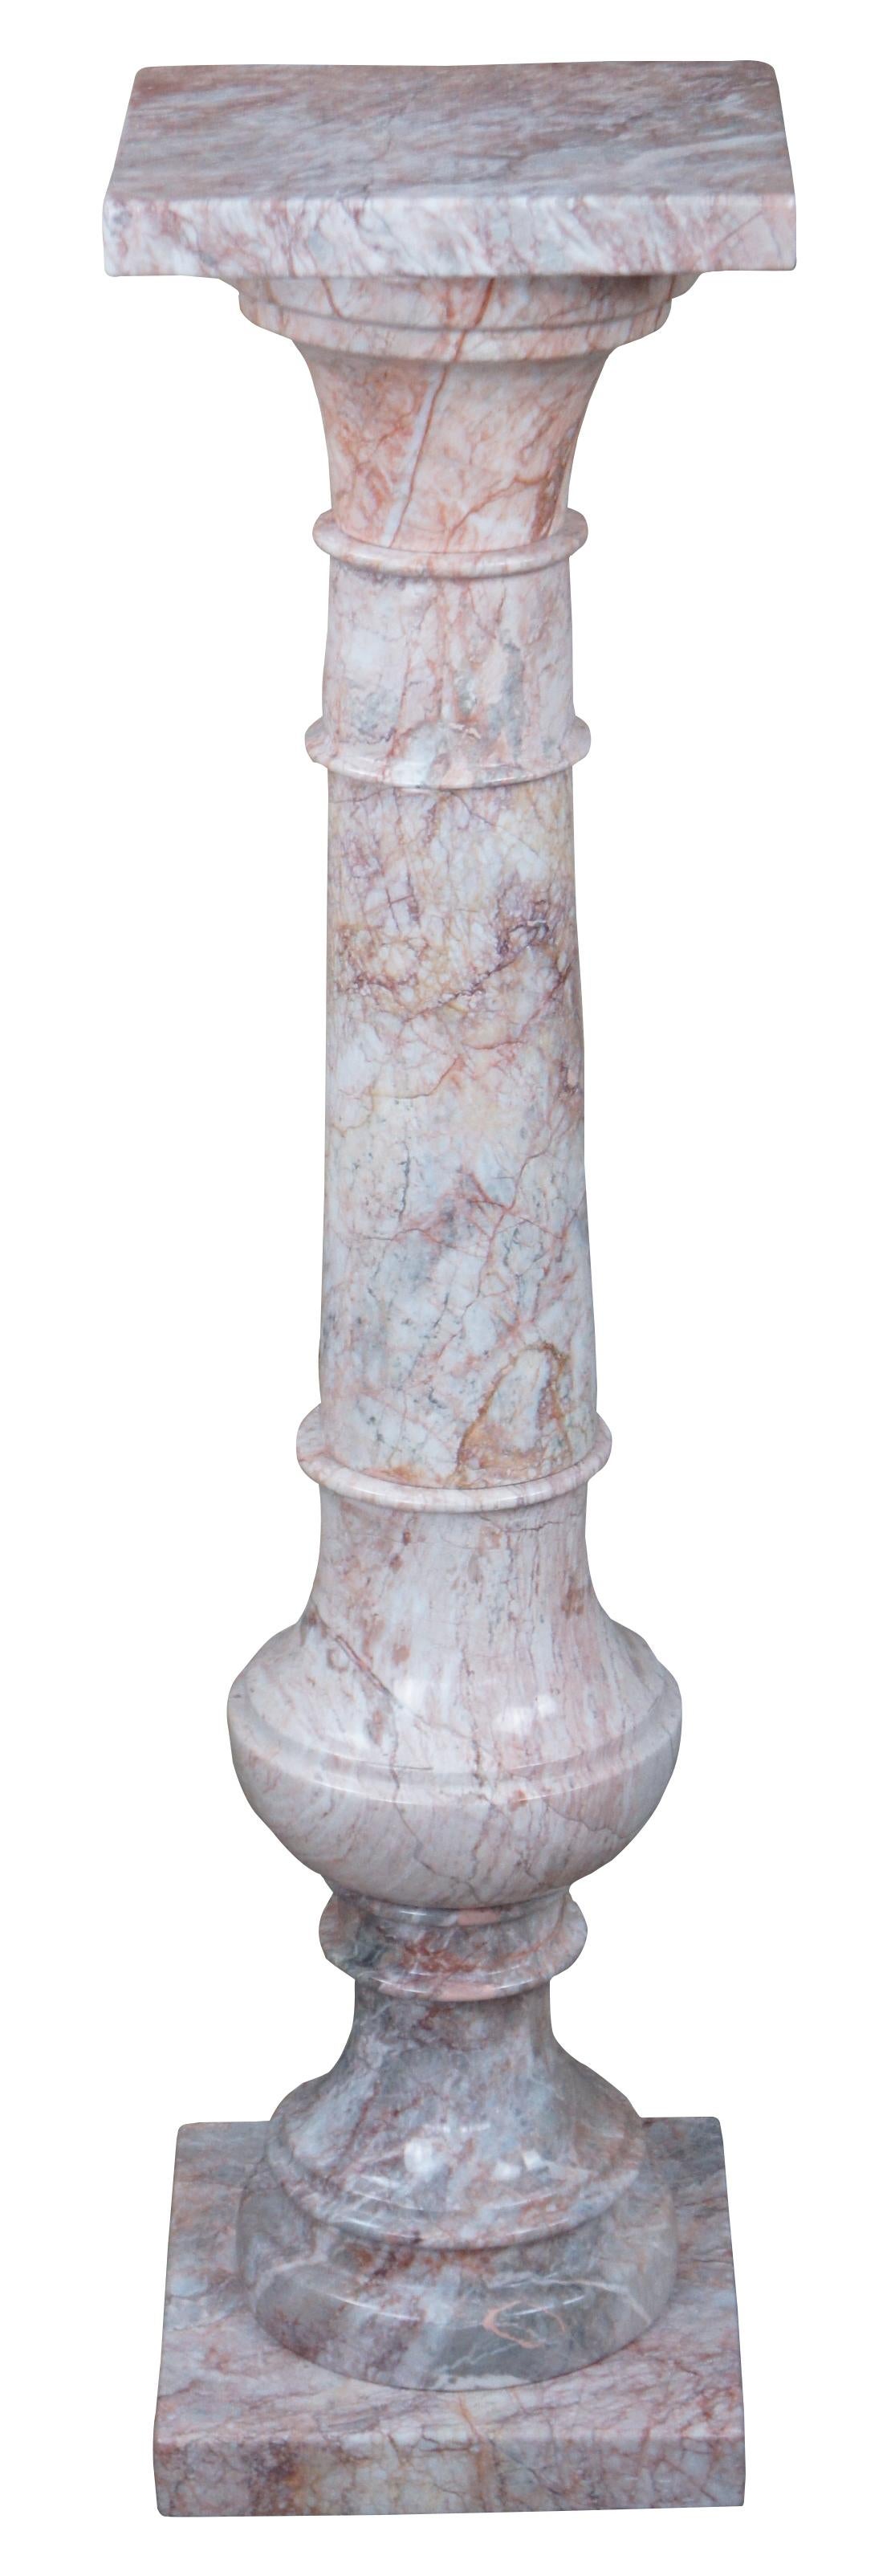 Pair of 20th century vintage Italian Classical Revival pink marble columns. An elegant trophy or baluster form with exceptional color. Made in Mexico.

Rouge Royal marble

The Red Royal marble quarry is located in Hautmont, Belgium. It is a